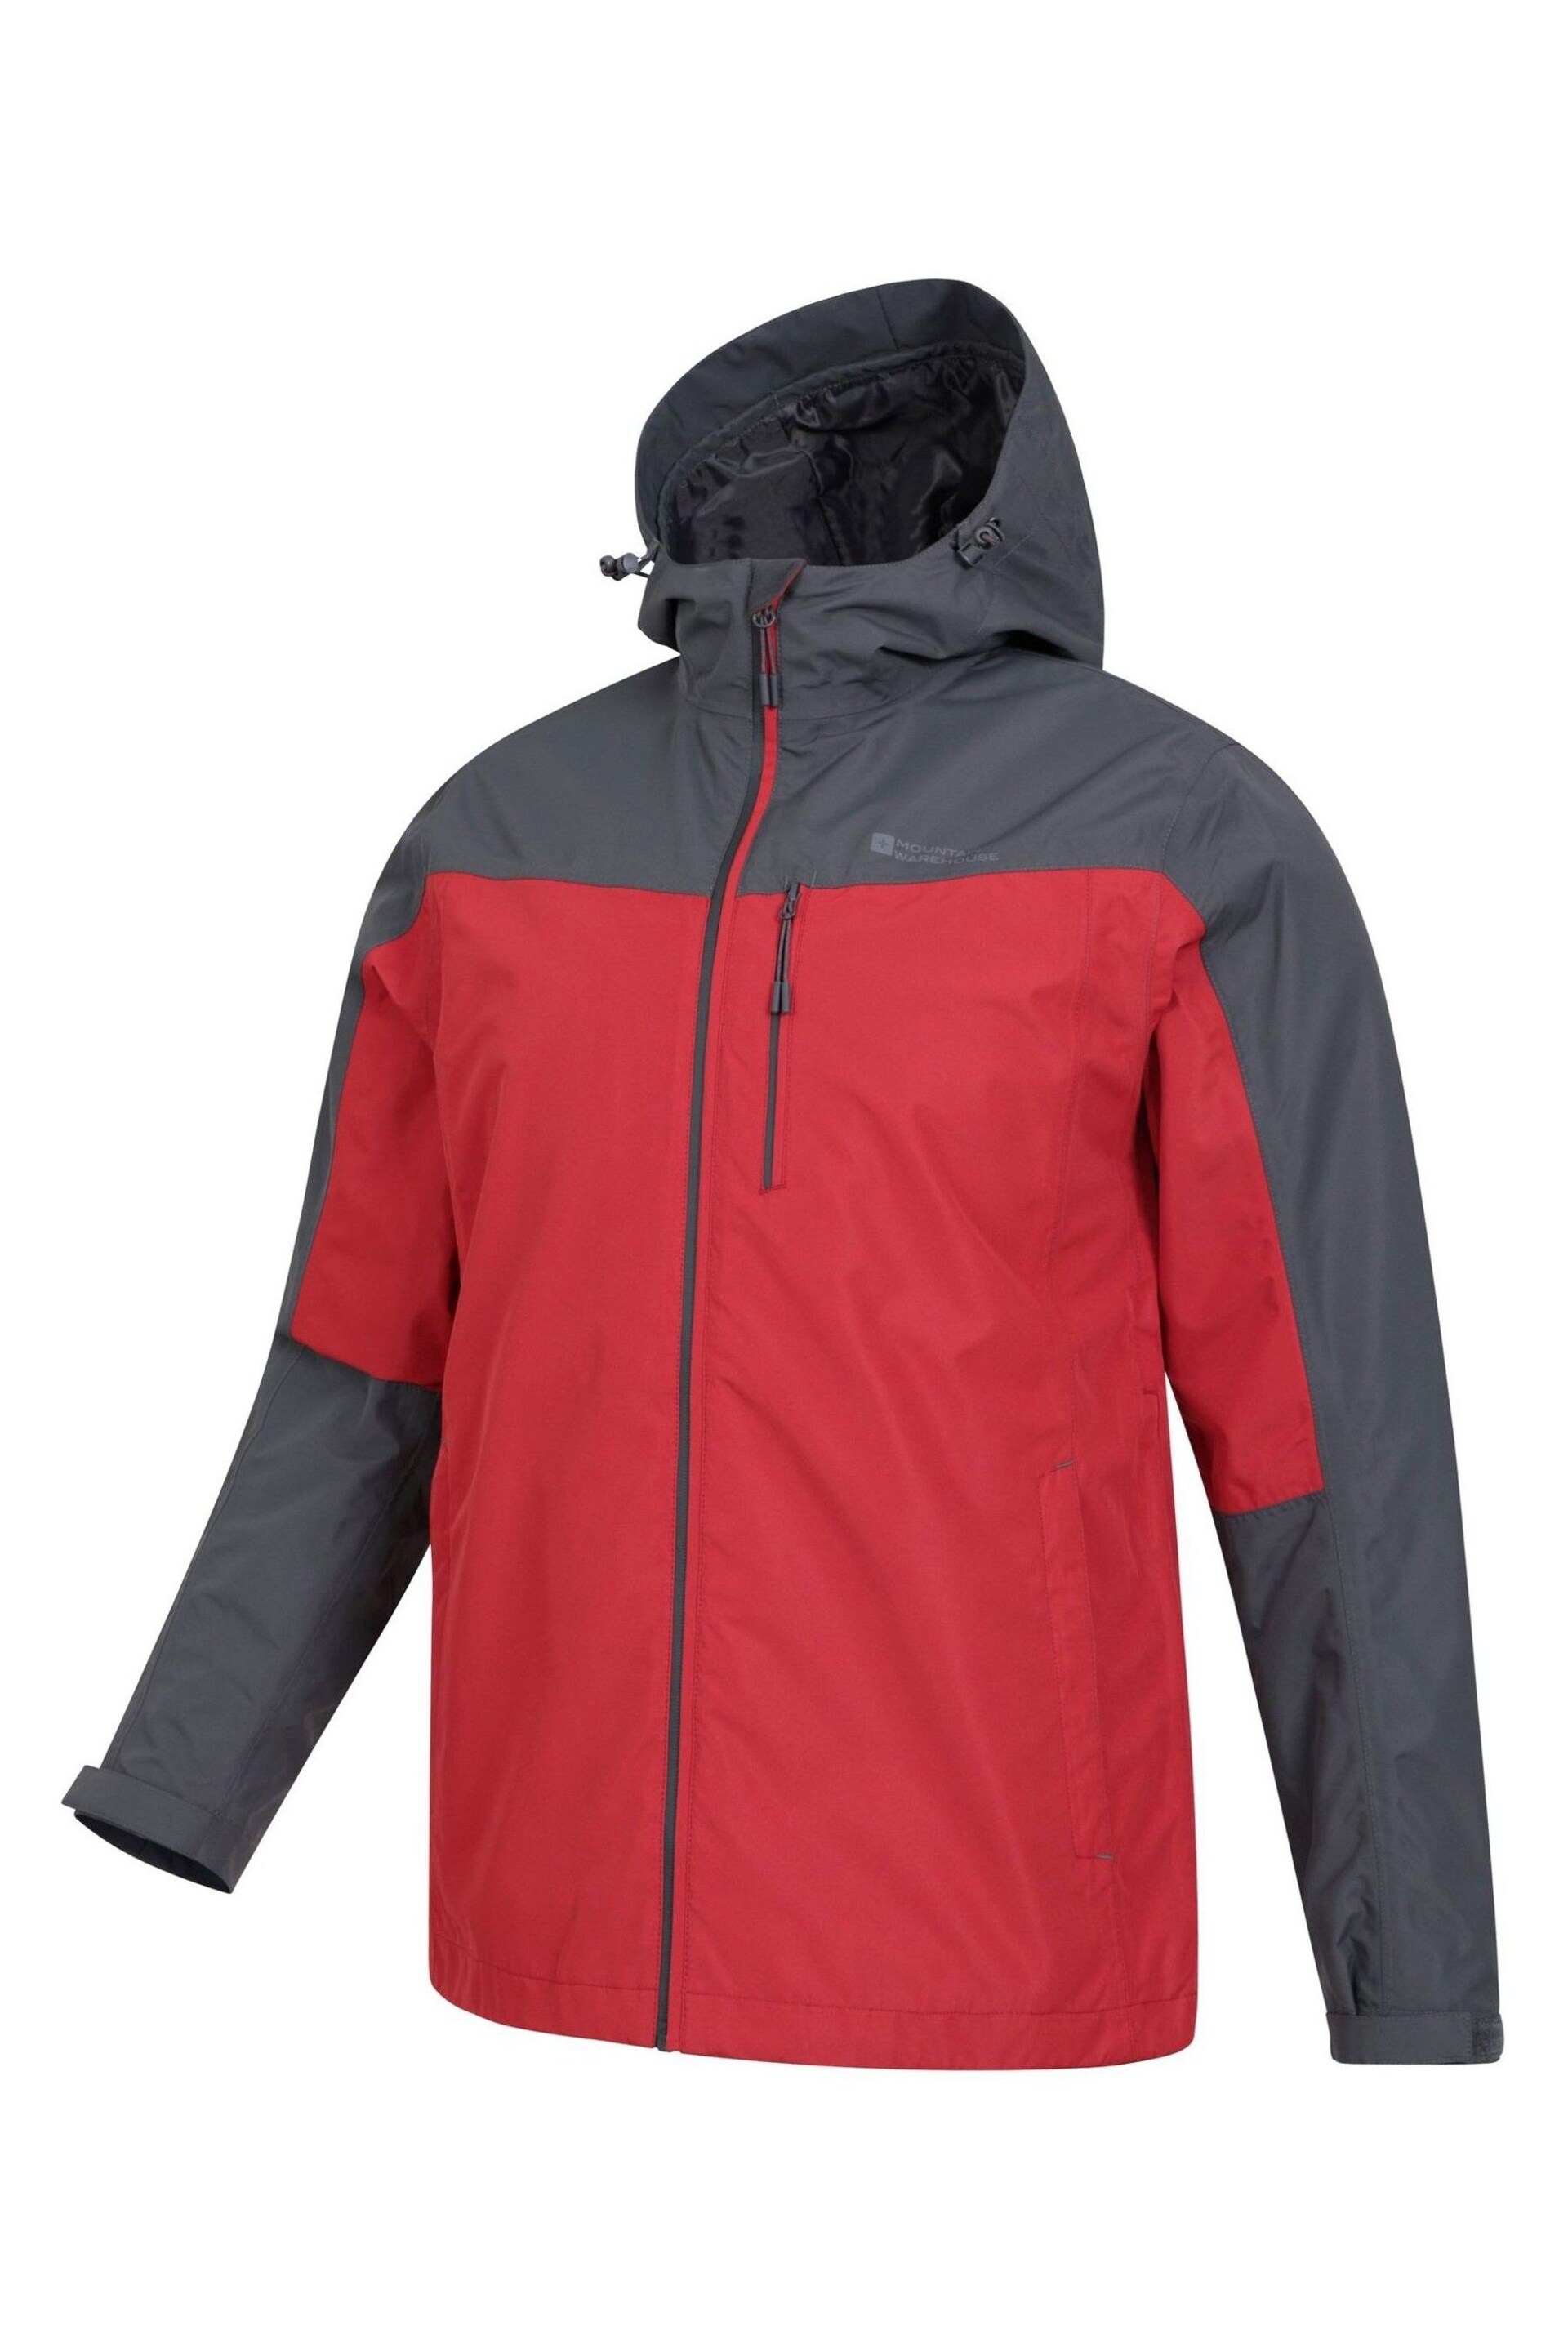 Mountain Warehouse Red Mens Brisk Extreme Waterproof Jacket - Image 4 of 5